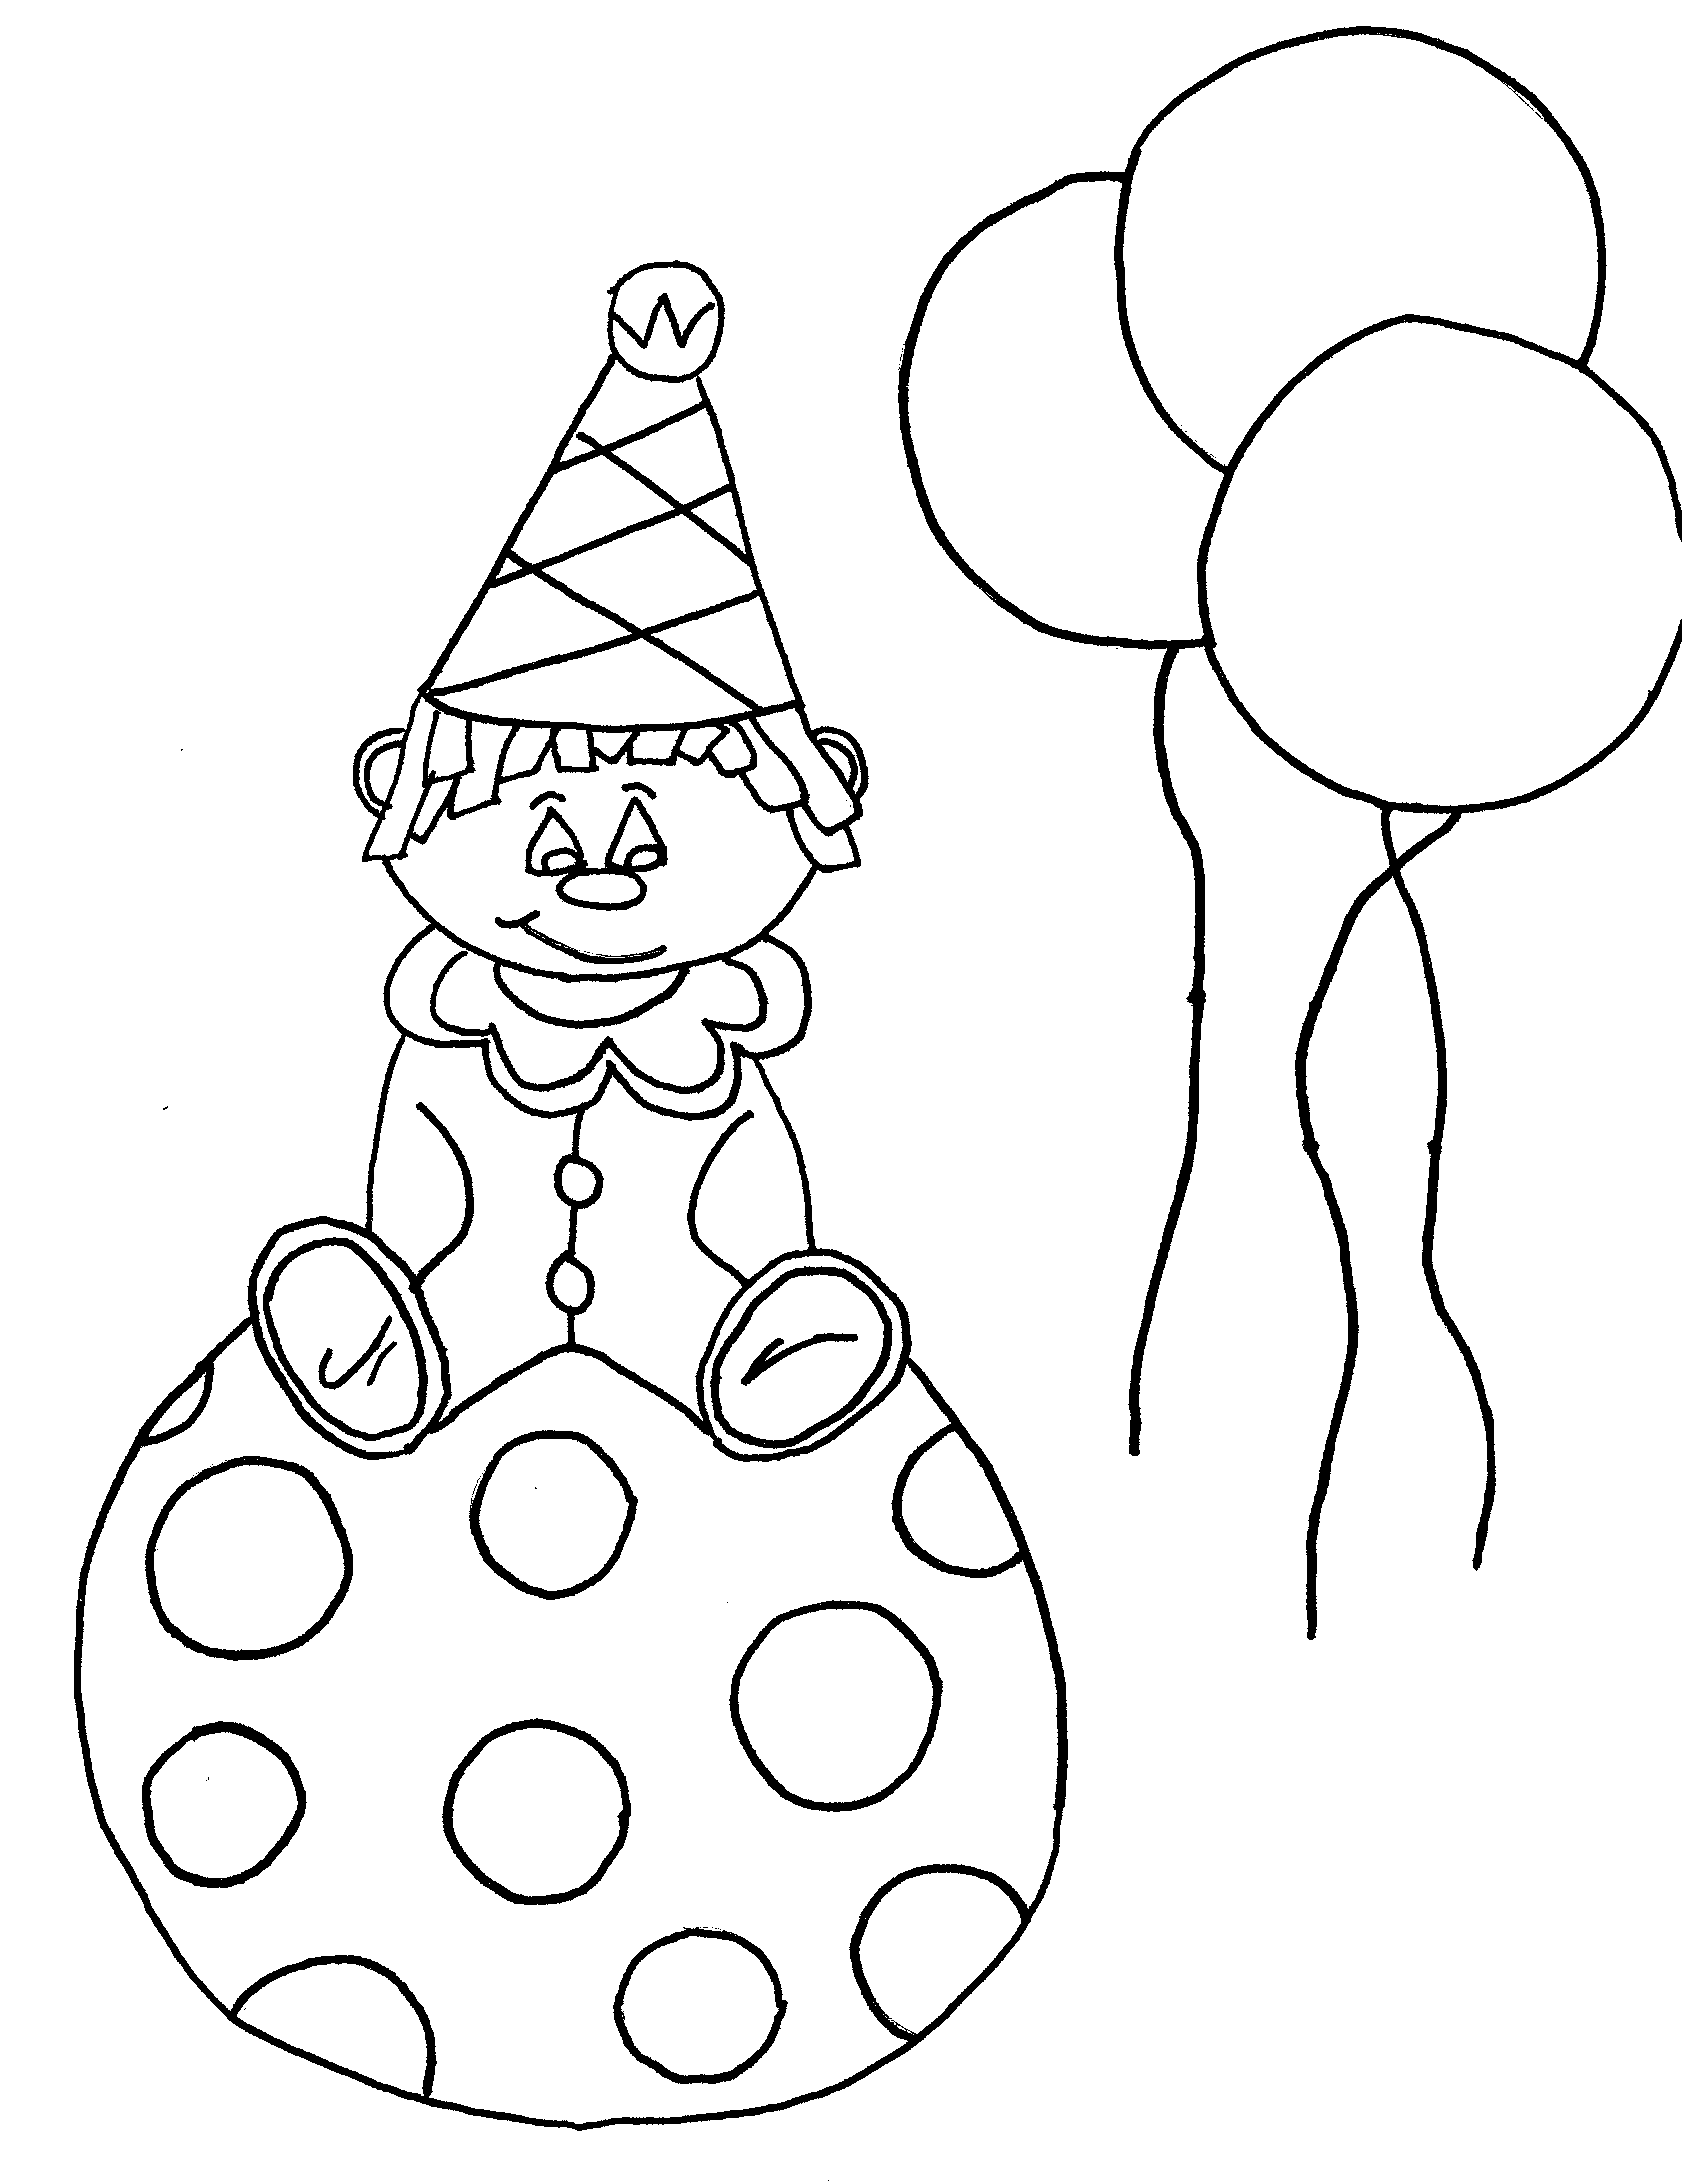 Clown Funny Coloring Page